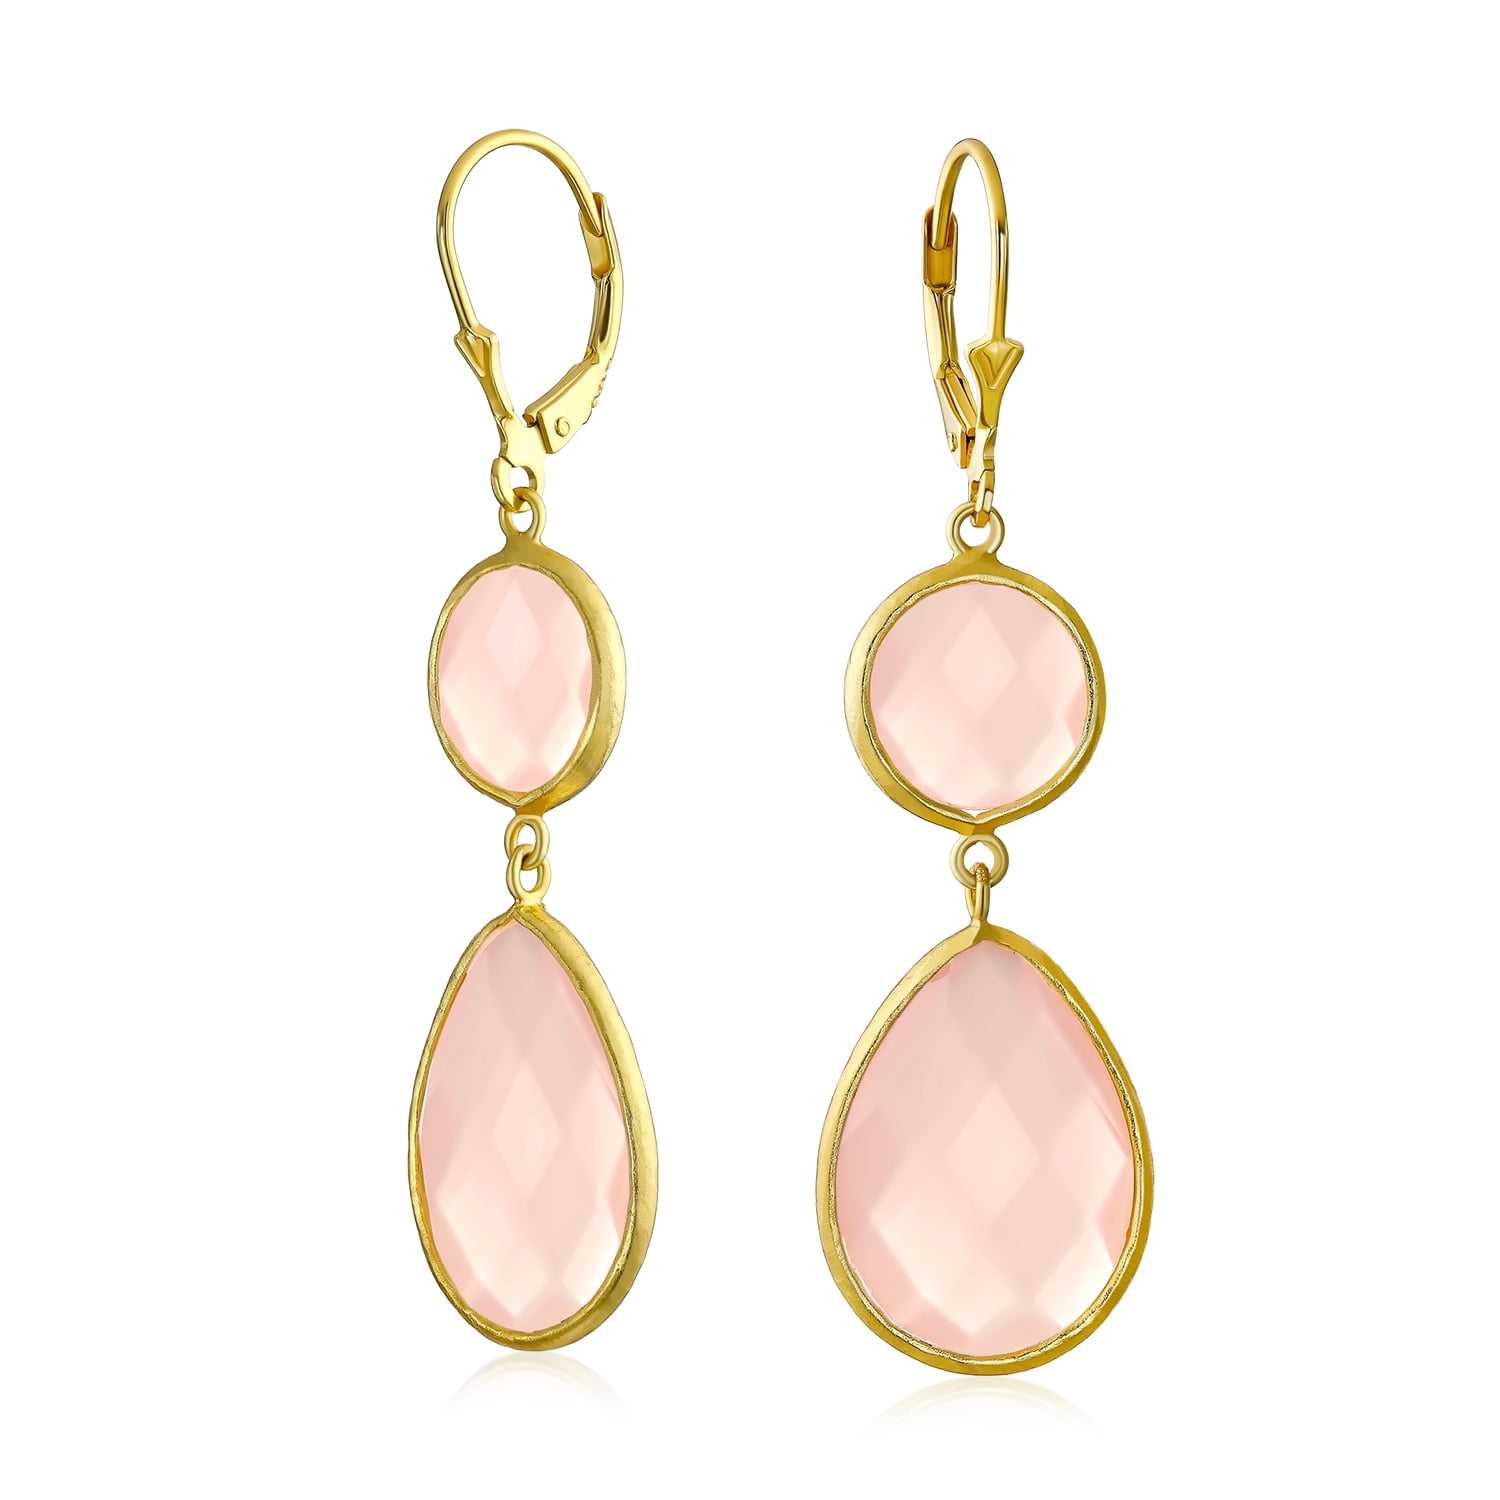 Details about   Yellow Chalcedony 14K Gold Plated 925 Sterling Silver Earrings Gemstone Jewelry 